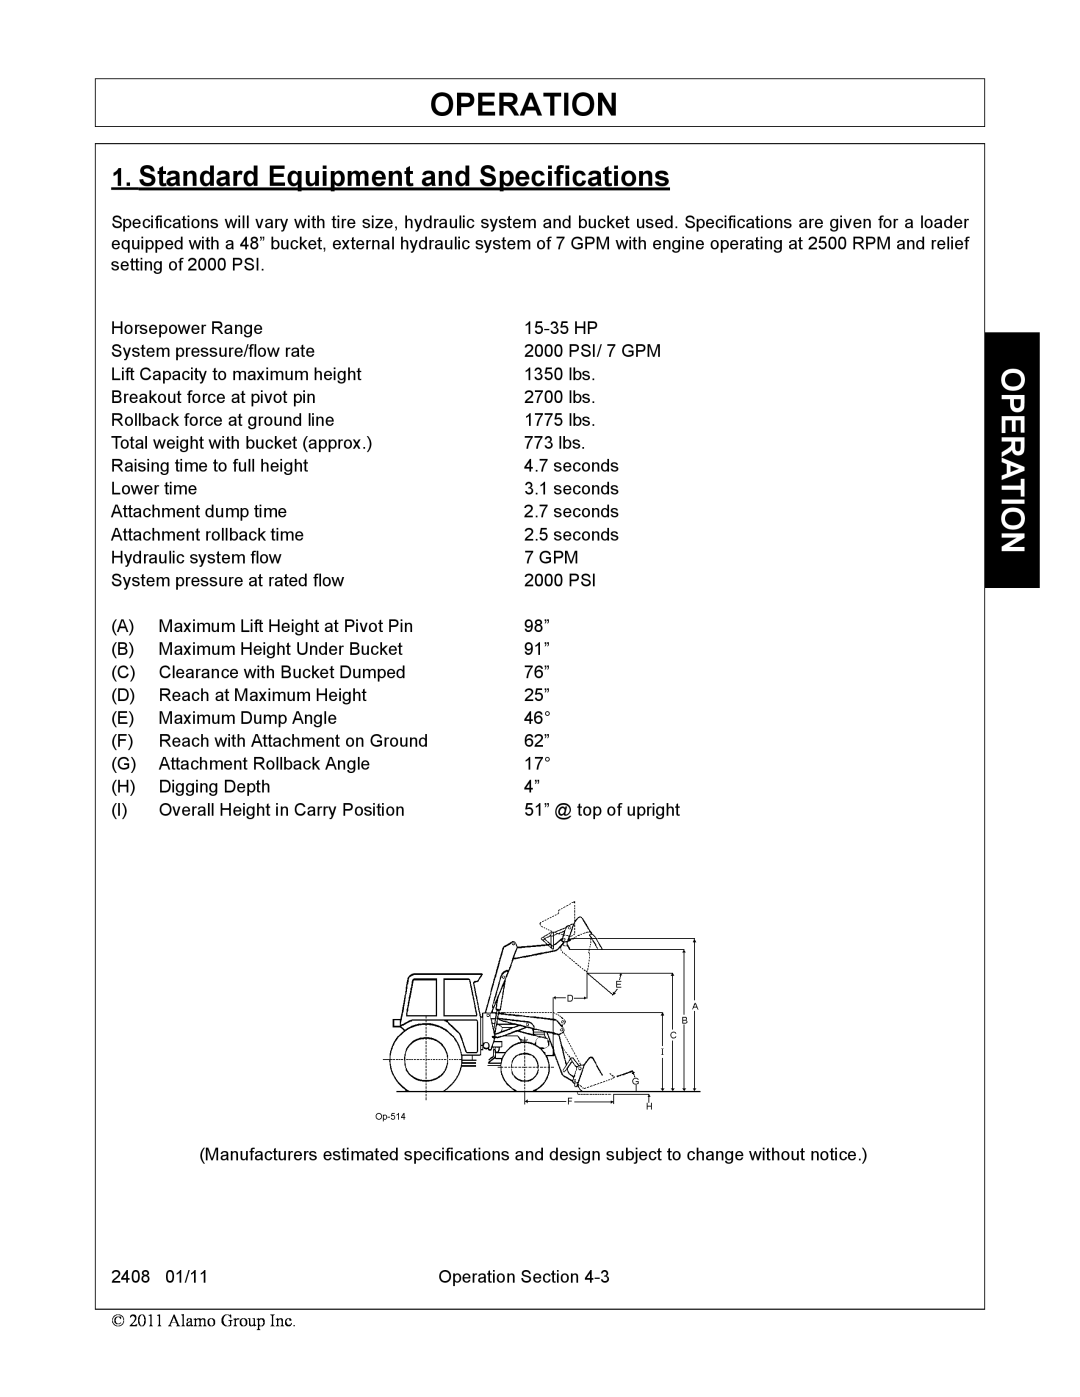 Rhino Mounts 2408 manual Operation, Standard Equipment and Specifications 